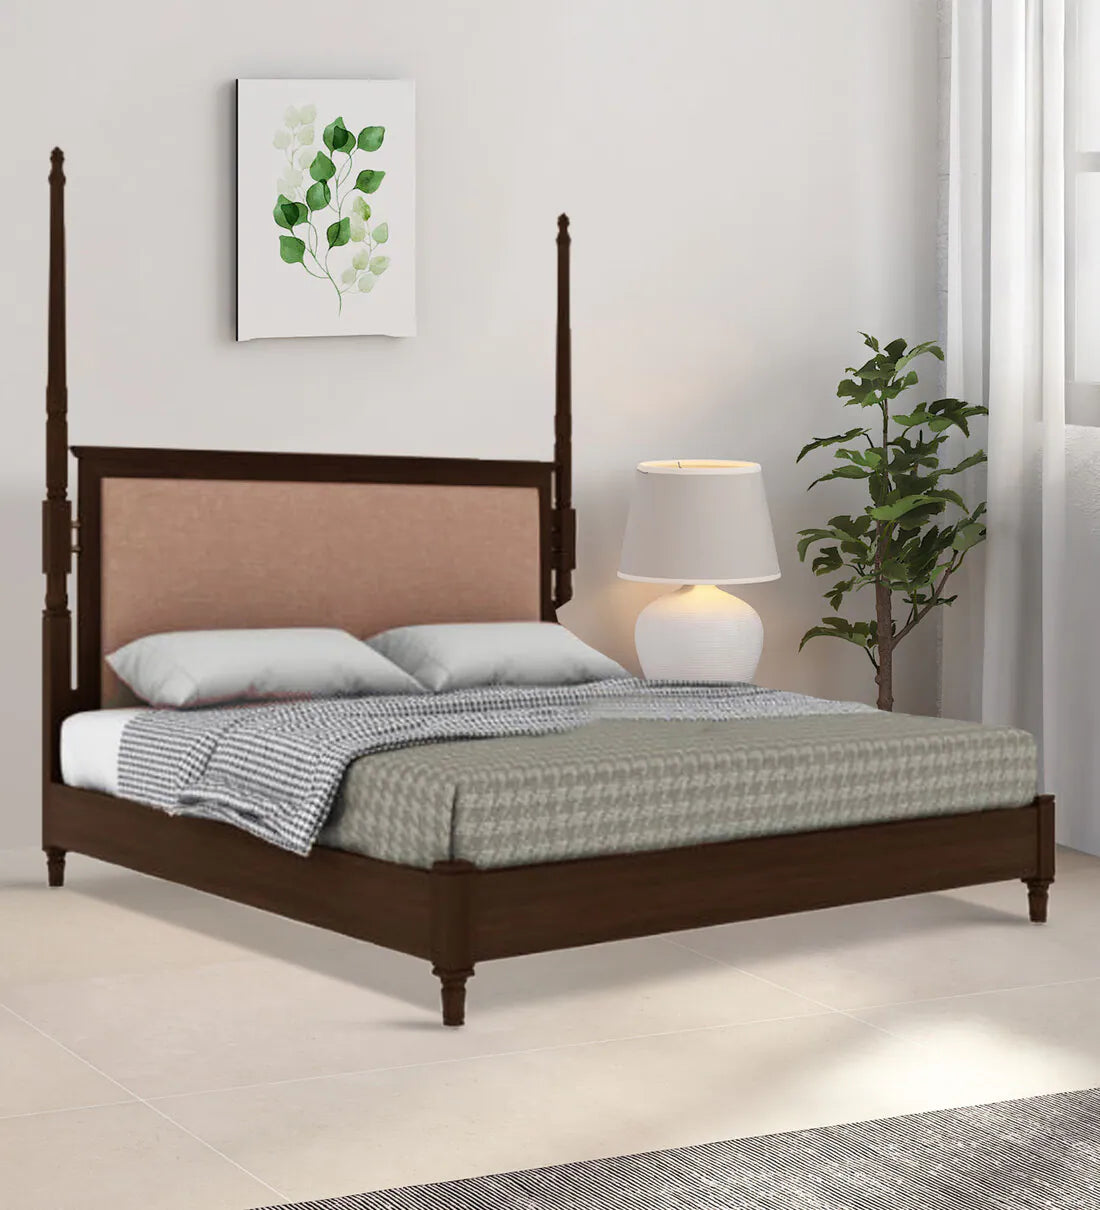 Oreal Solid Wood King Size Bed in Tubbaq Finish